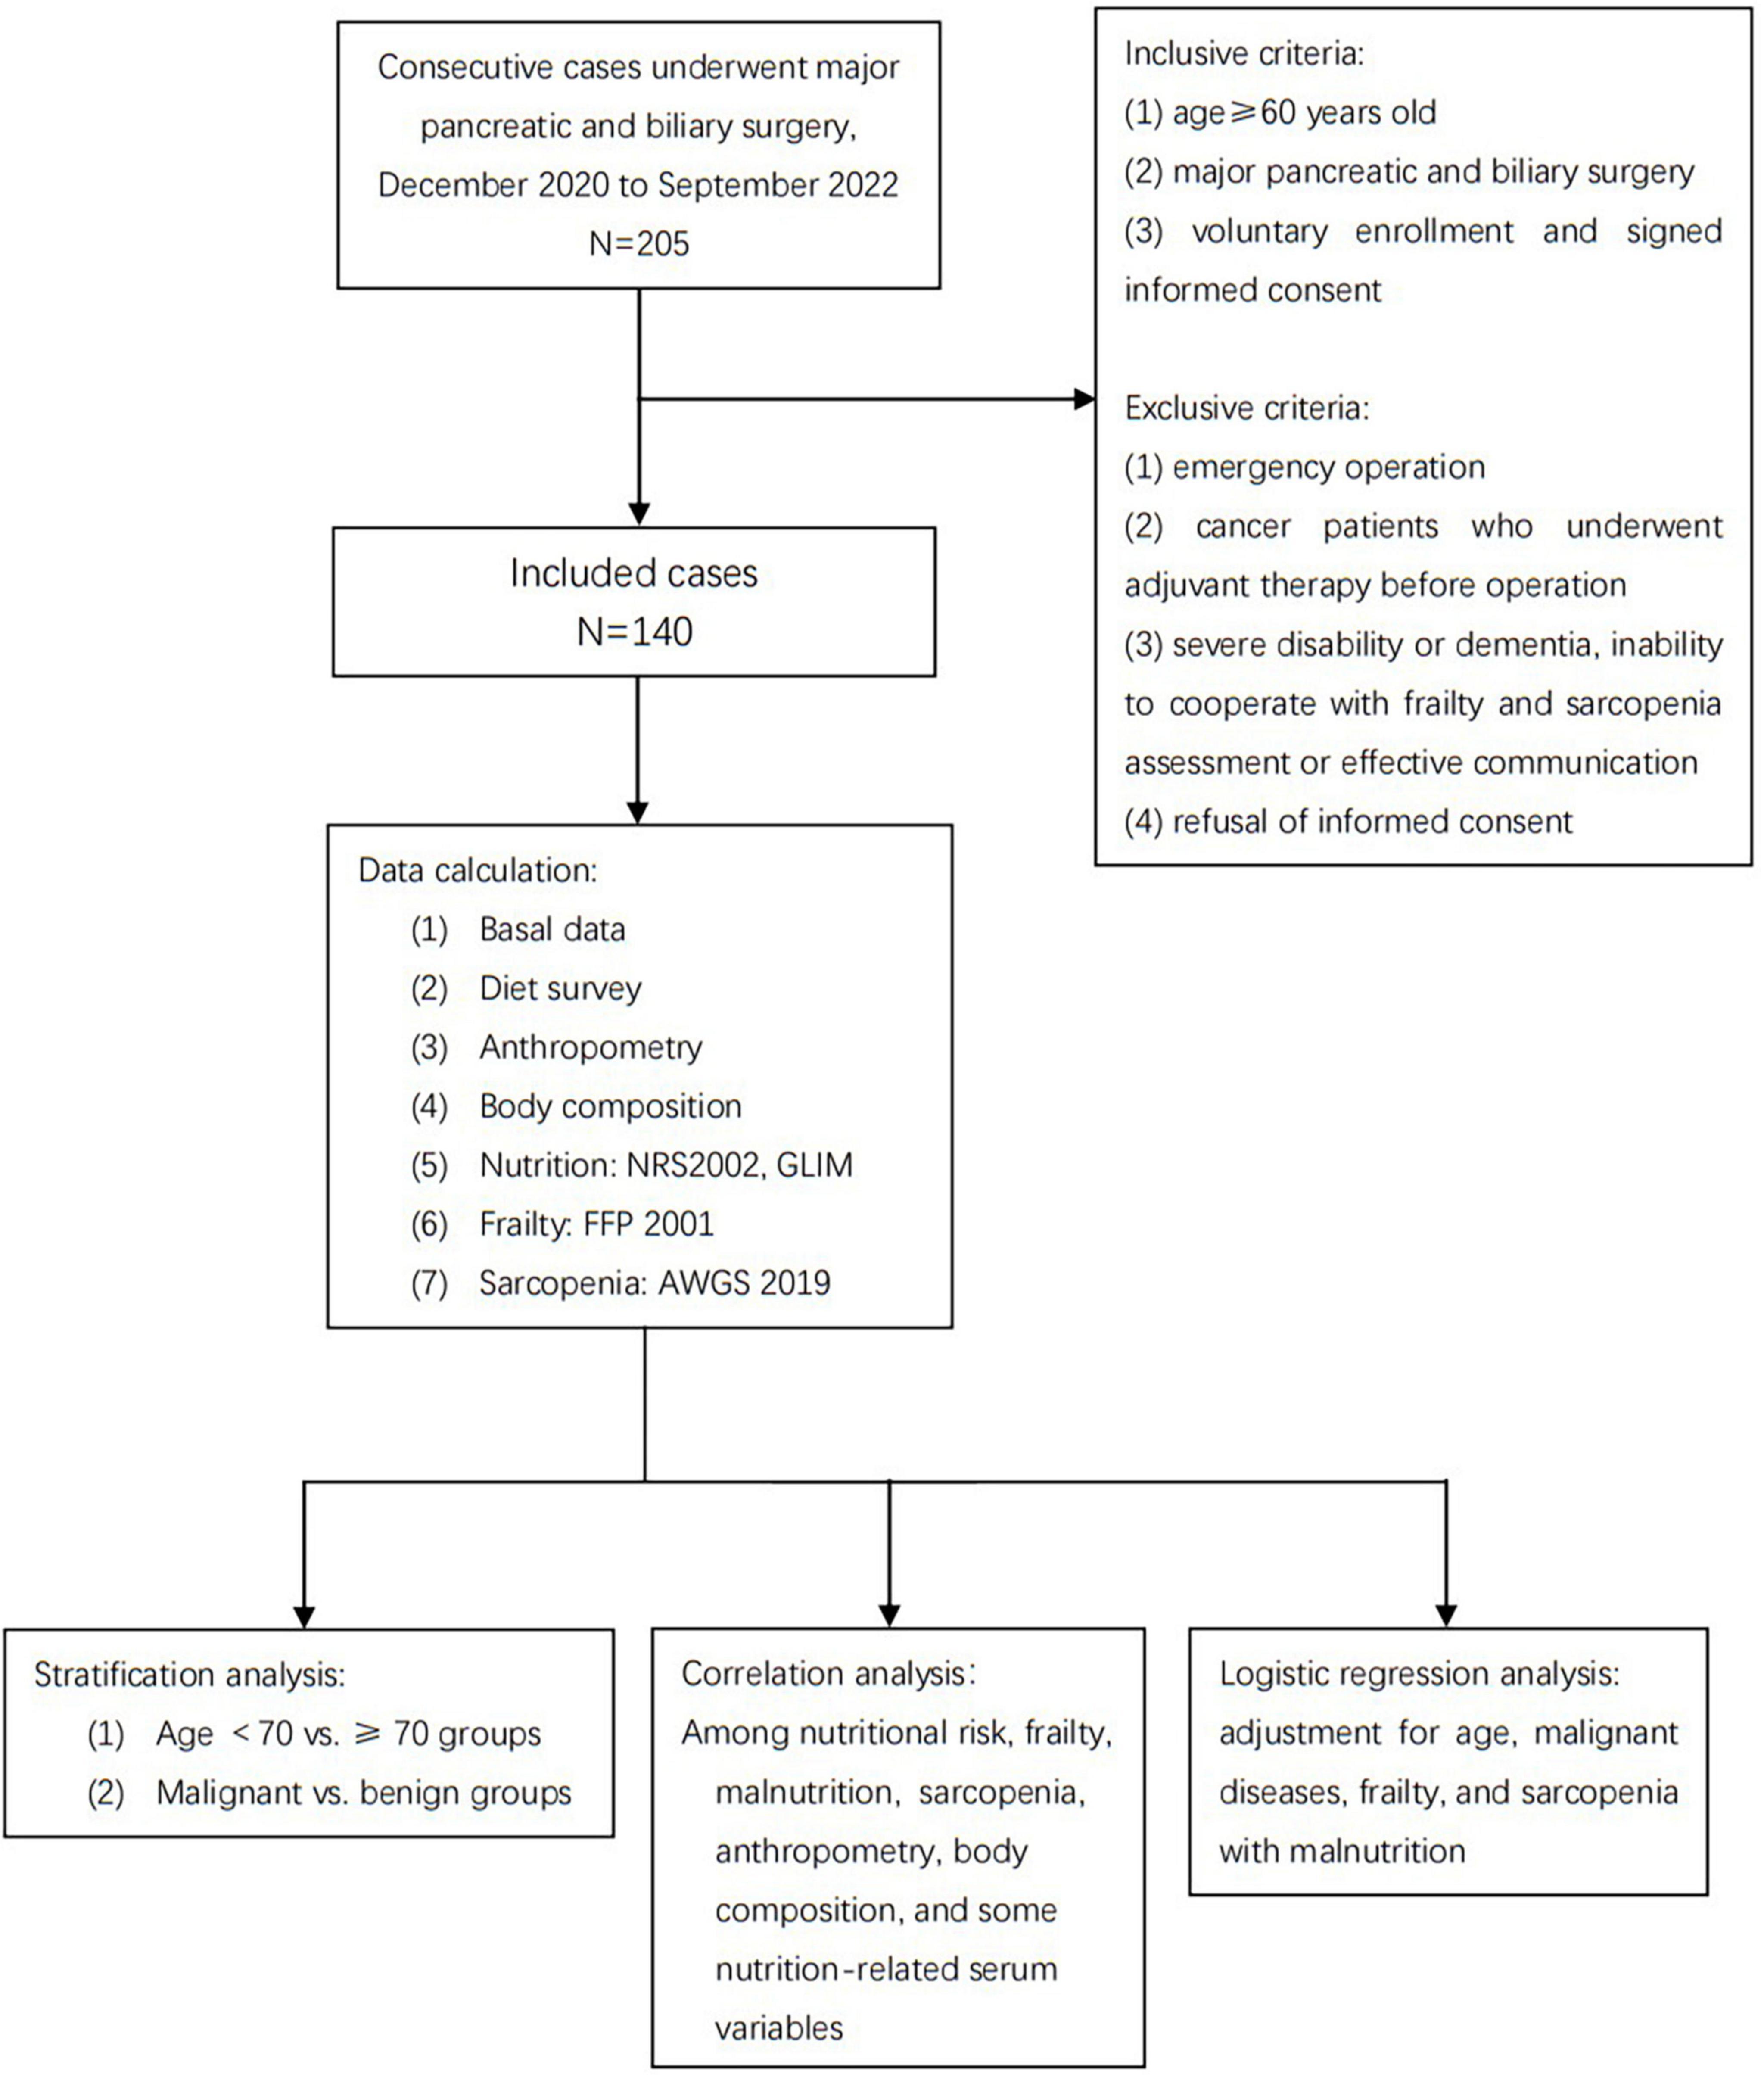 Relationship between preoperative malnutrition, frailty, sarcopenia, body composition, and anthropometry in elderly patients undergoing major pancreatic and biliary surgery